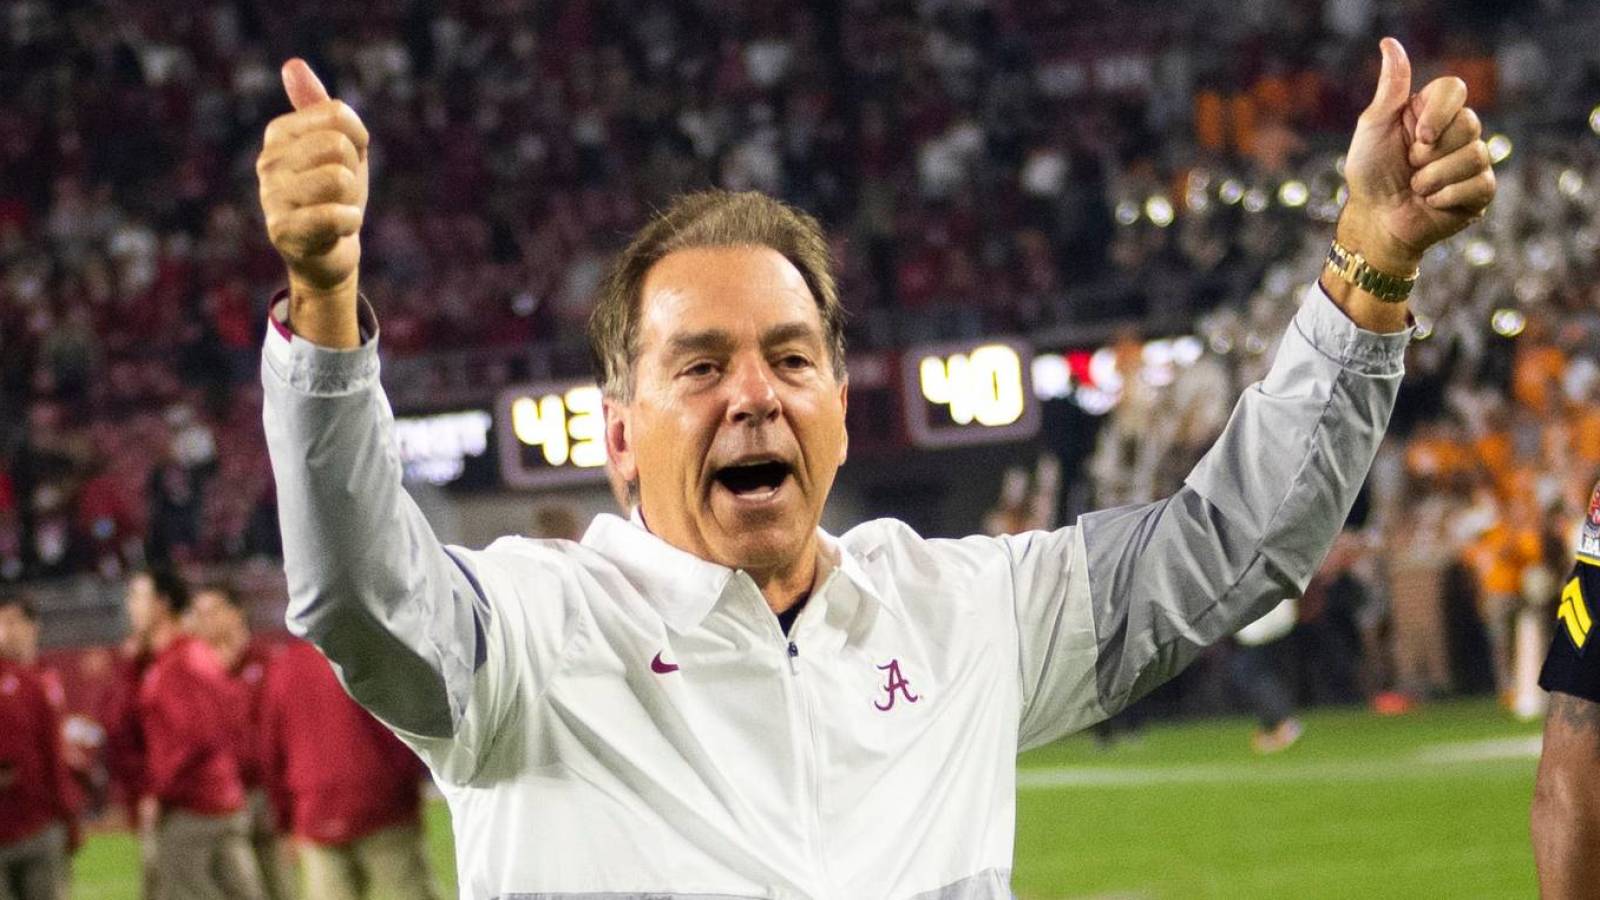 Nick Saban has contract clause that could lead to big raise